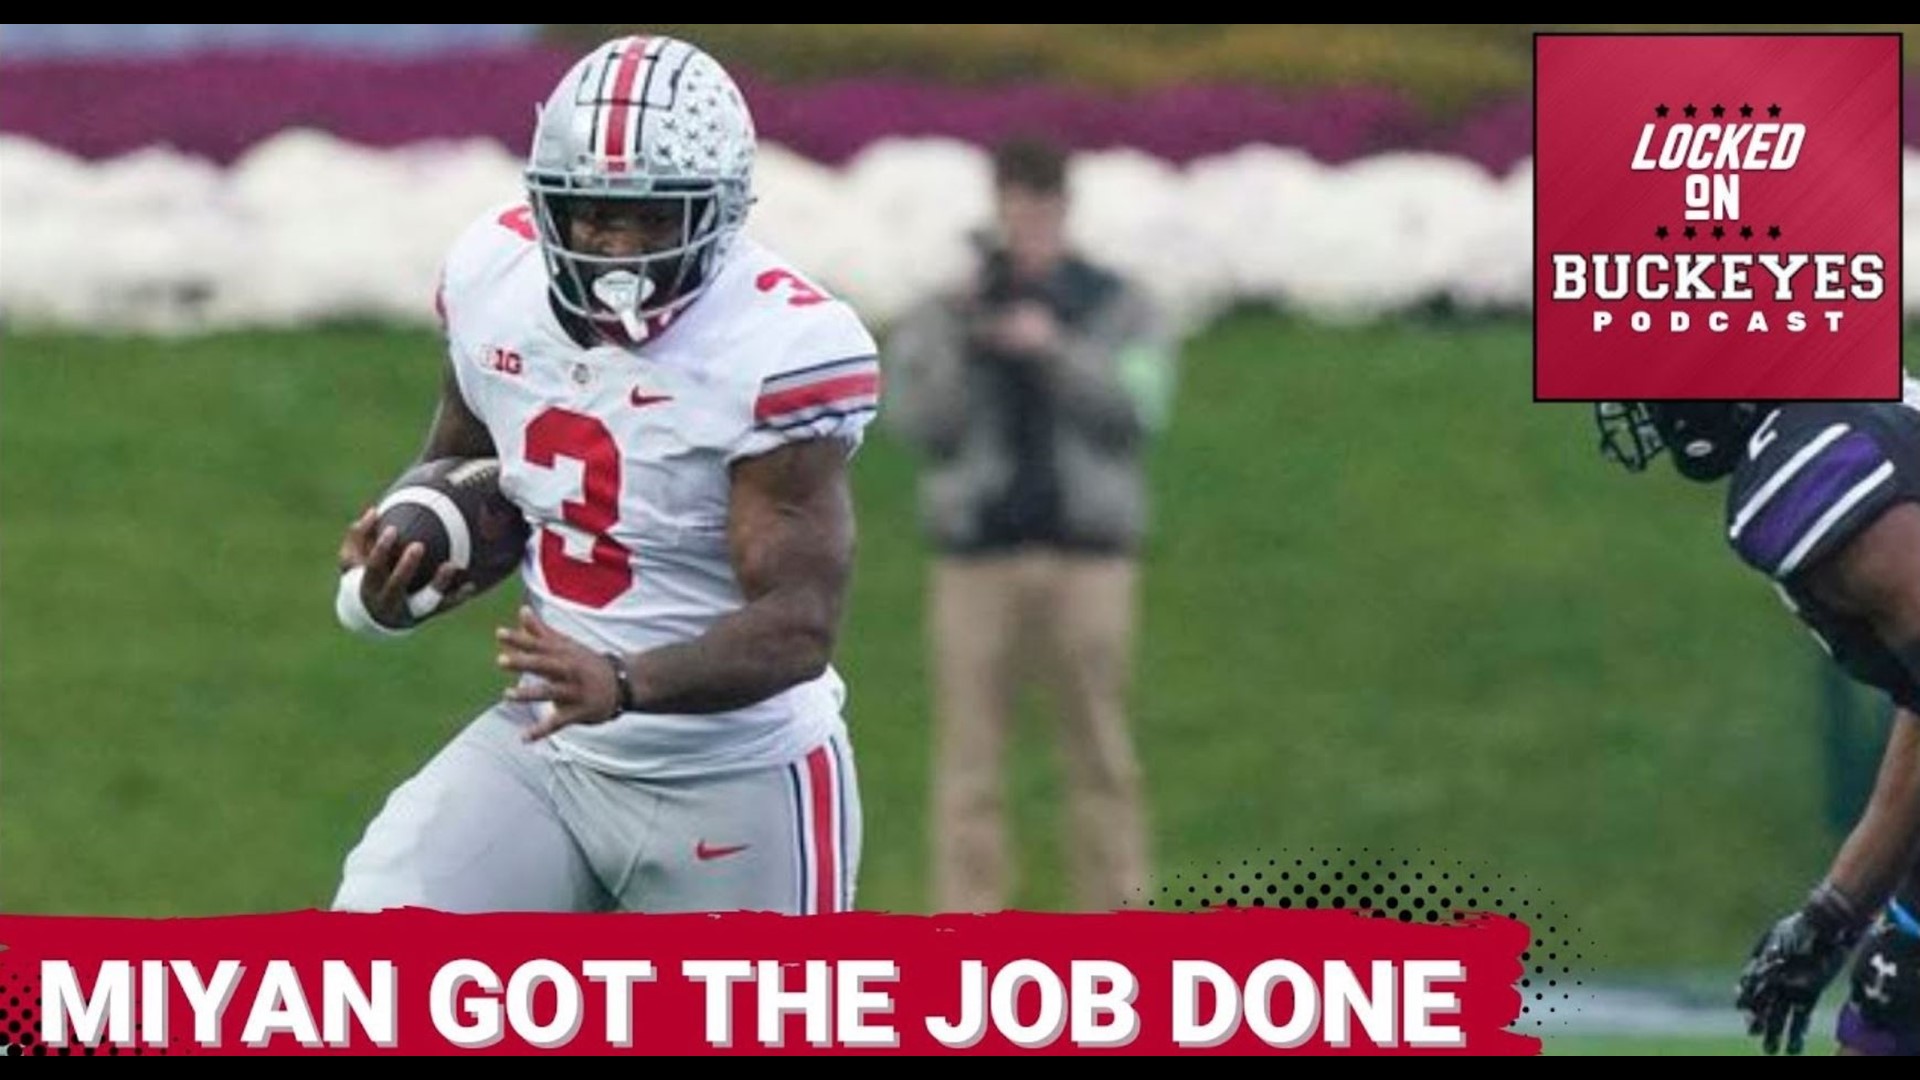 We break down the game between Ohio State and Northwestern University in this edition of the Locked On Buckeyes podcast.